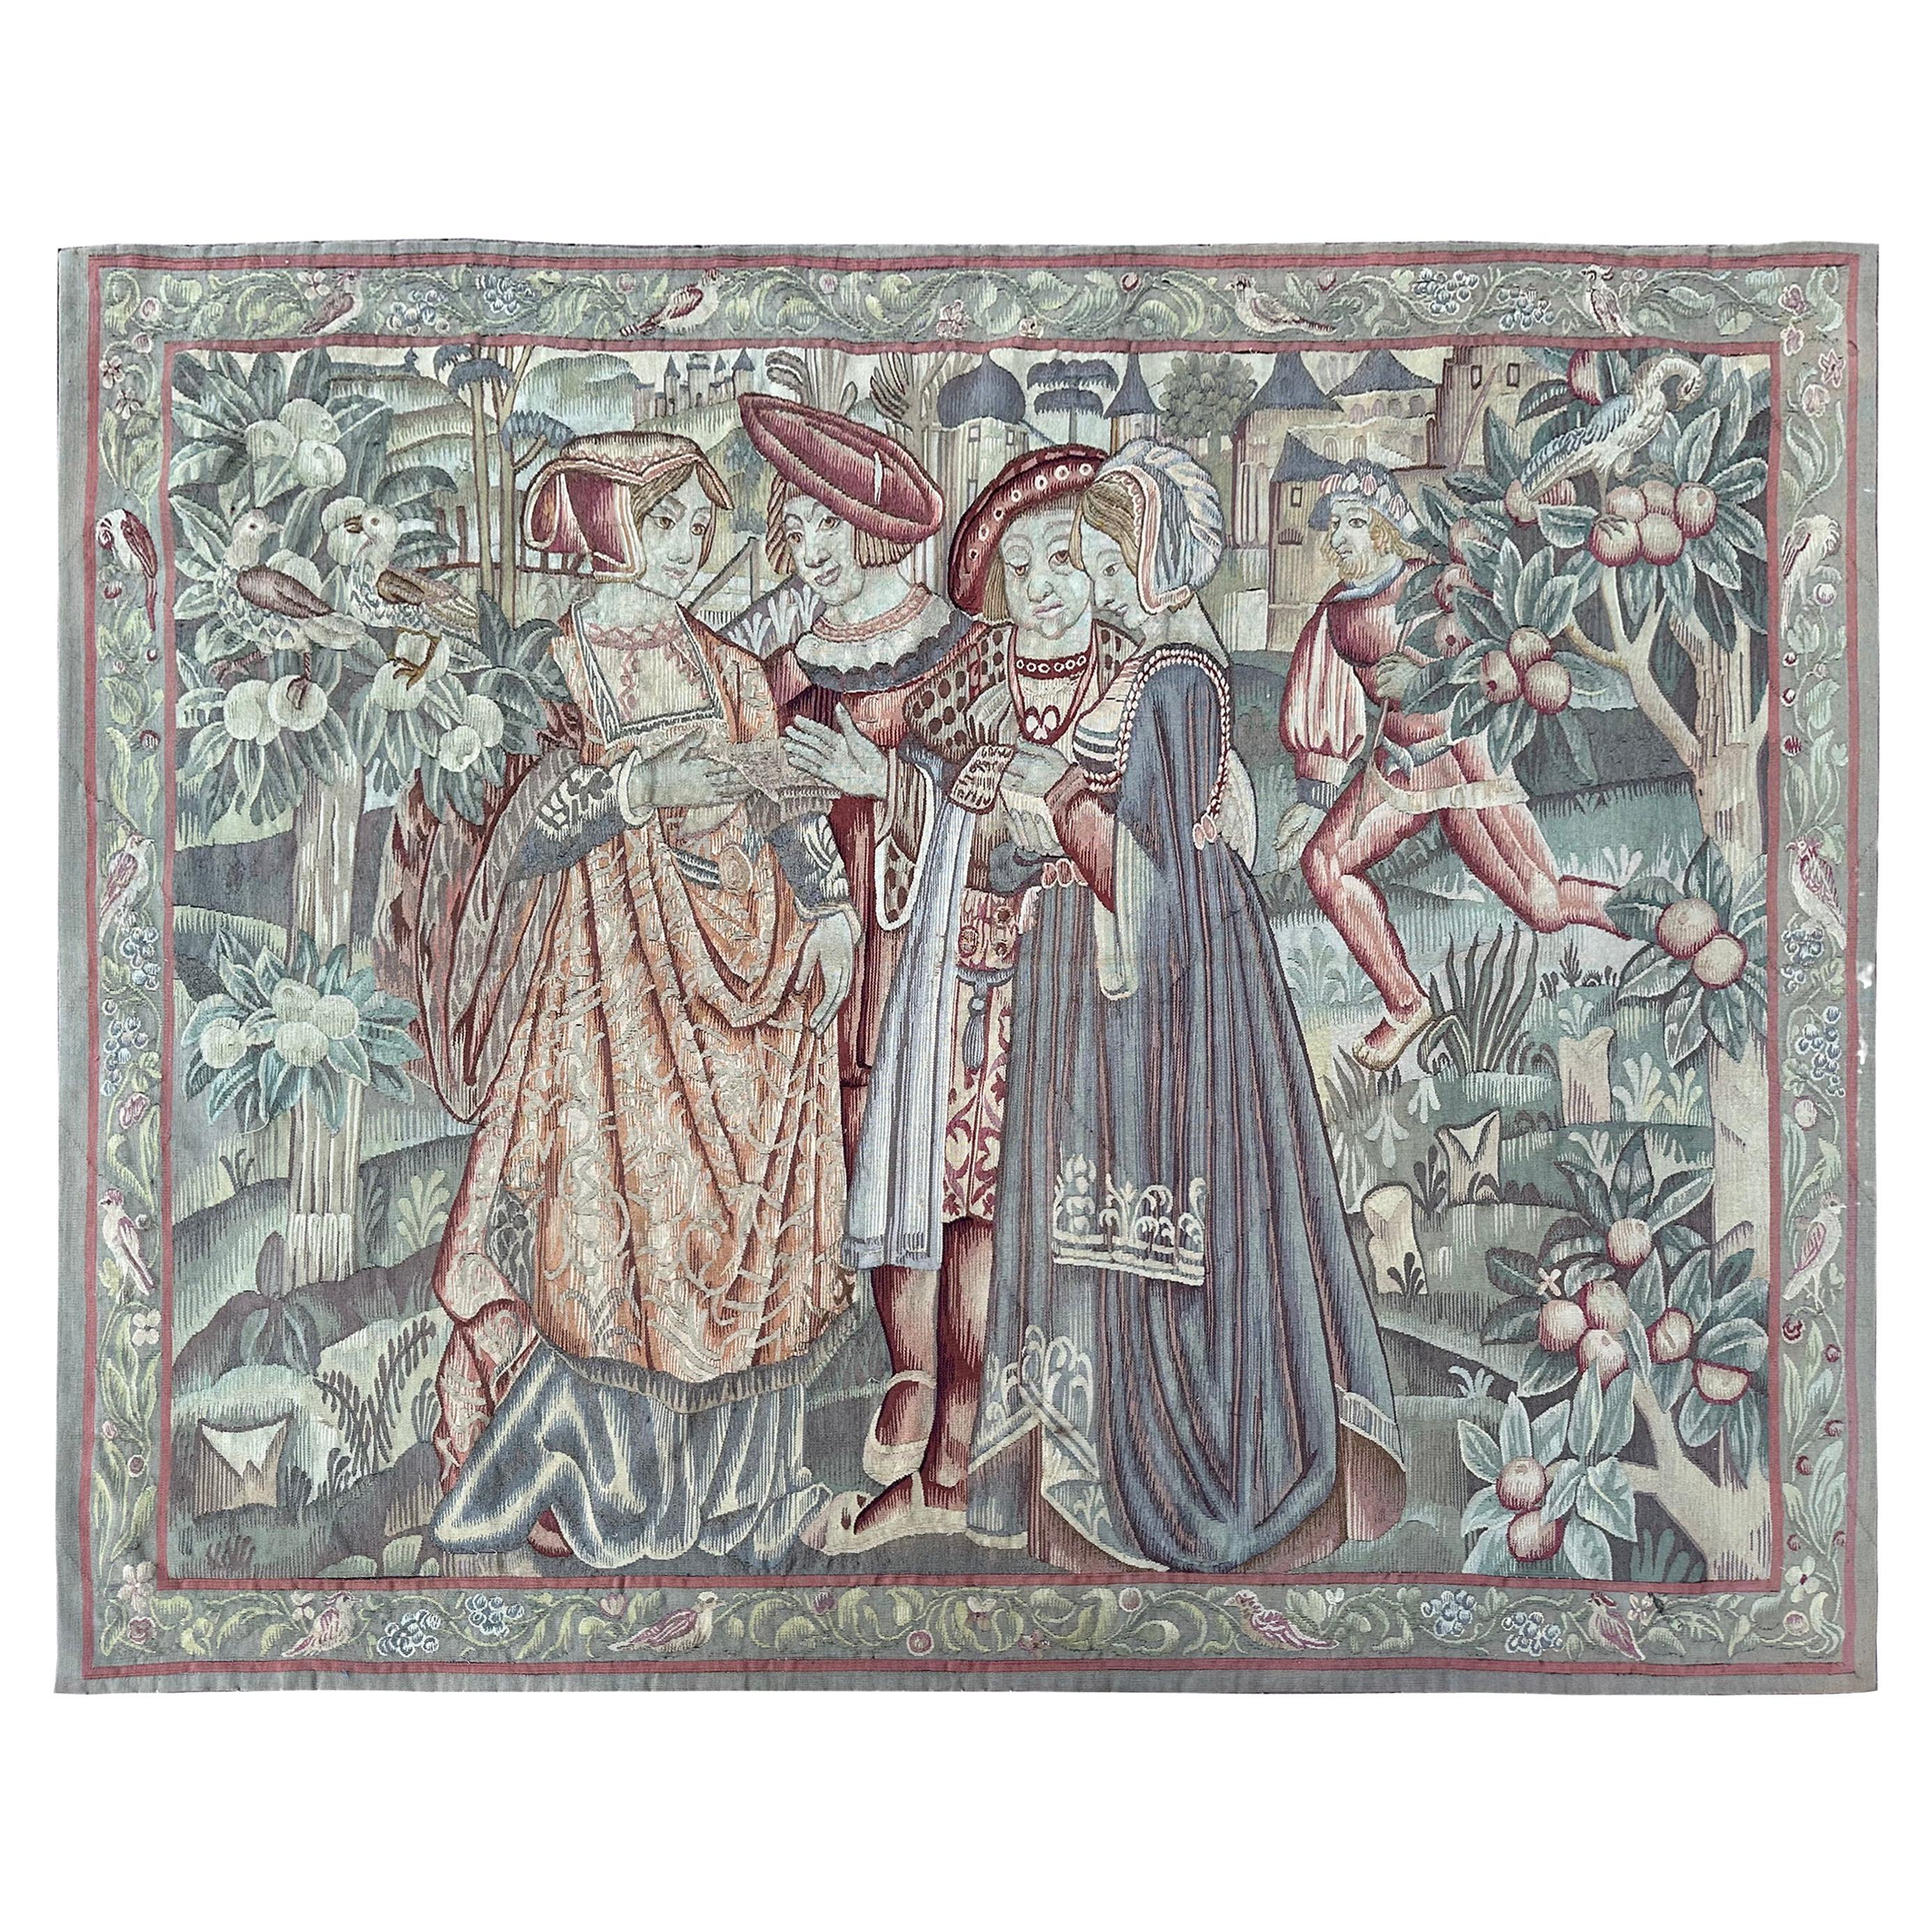 Antique French Tapestry Verdure Fruits Noblemen 1890 Wool & Silk 6x7 183 x 206cm For Sale